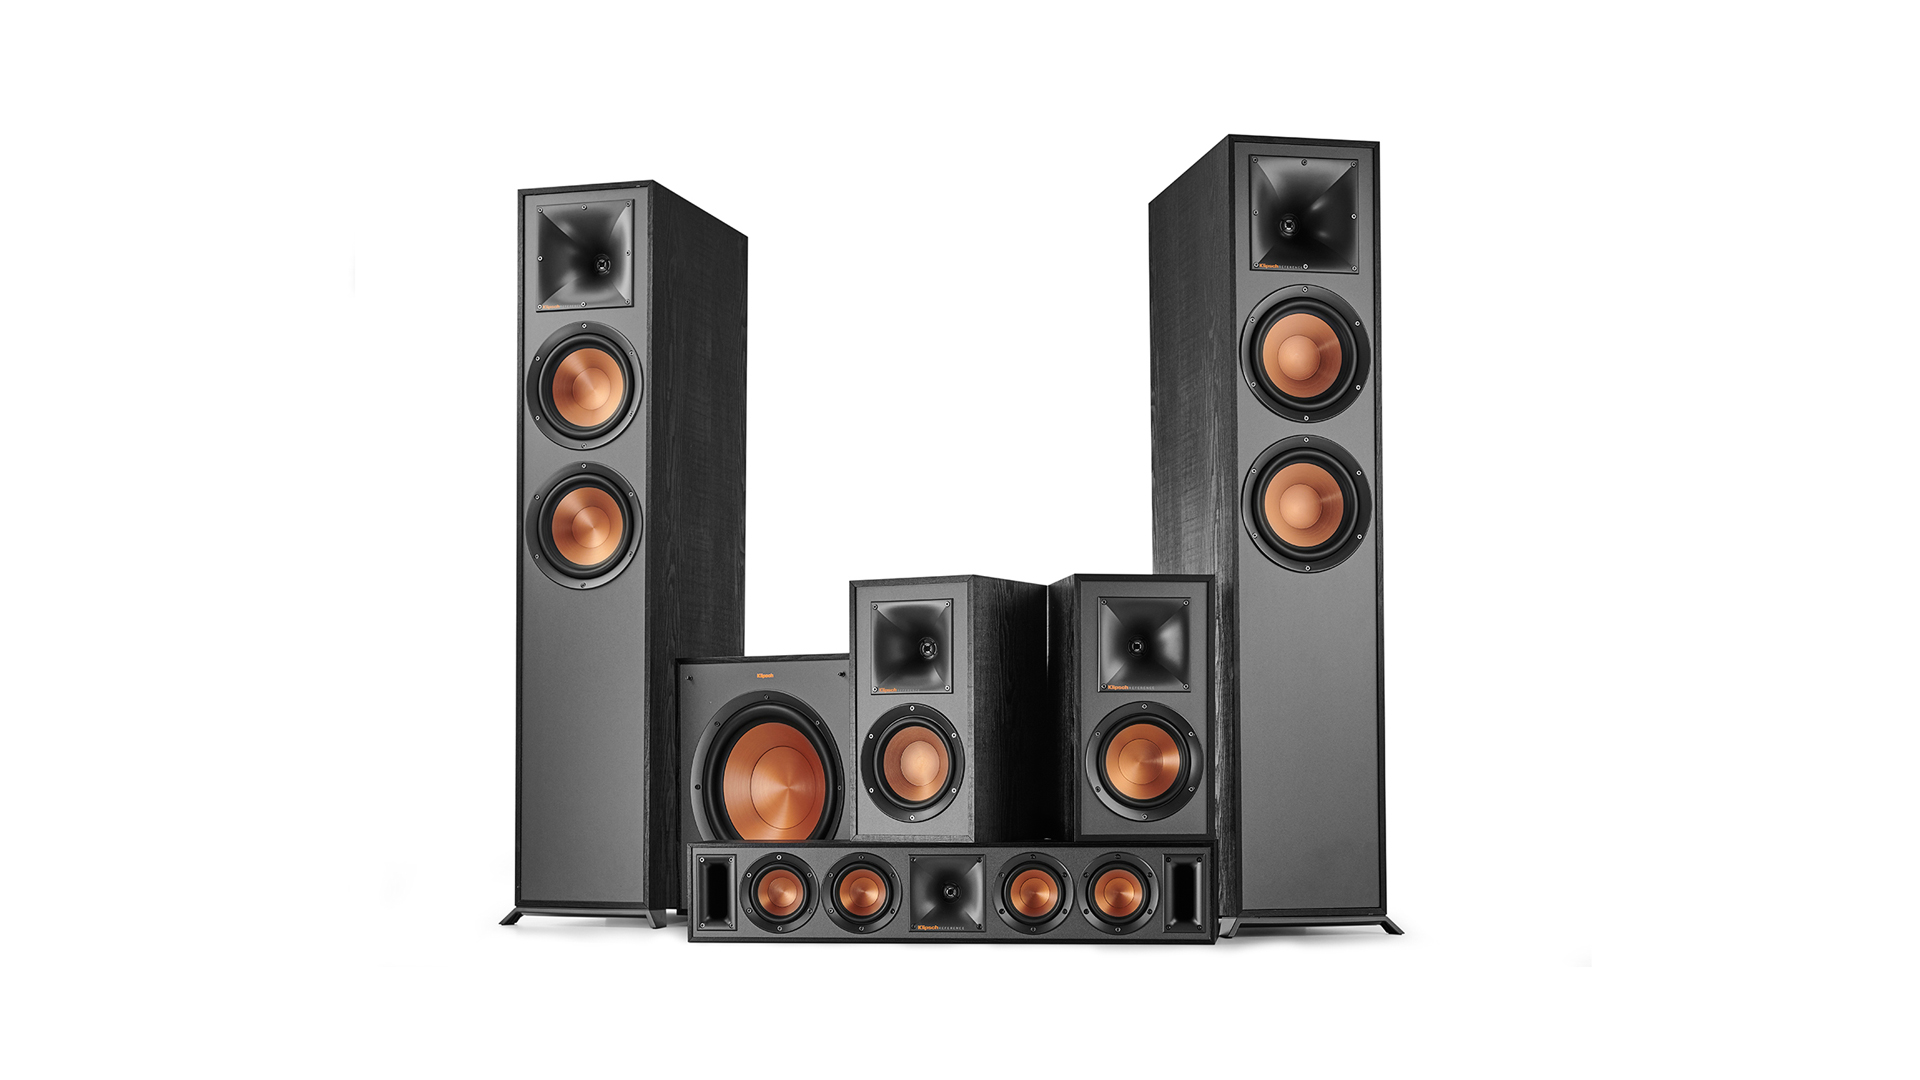 R-600F 5.1 Home Theater System